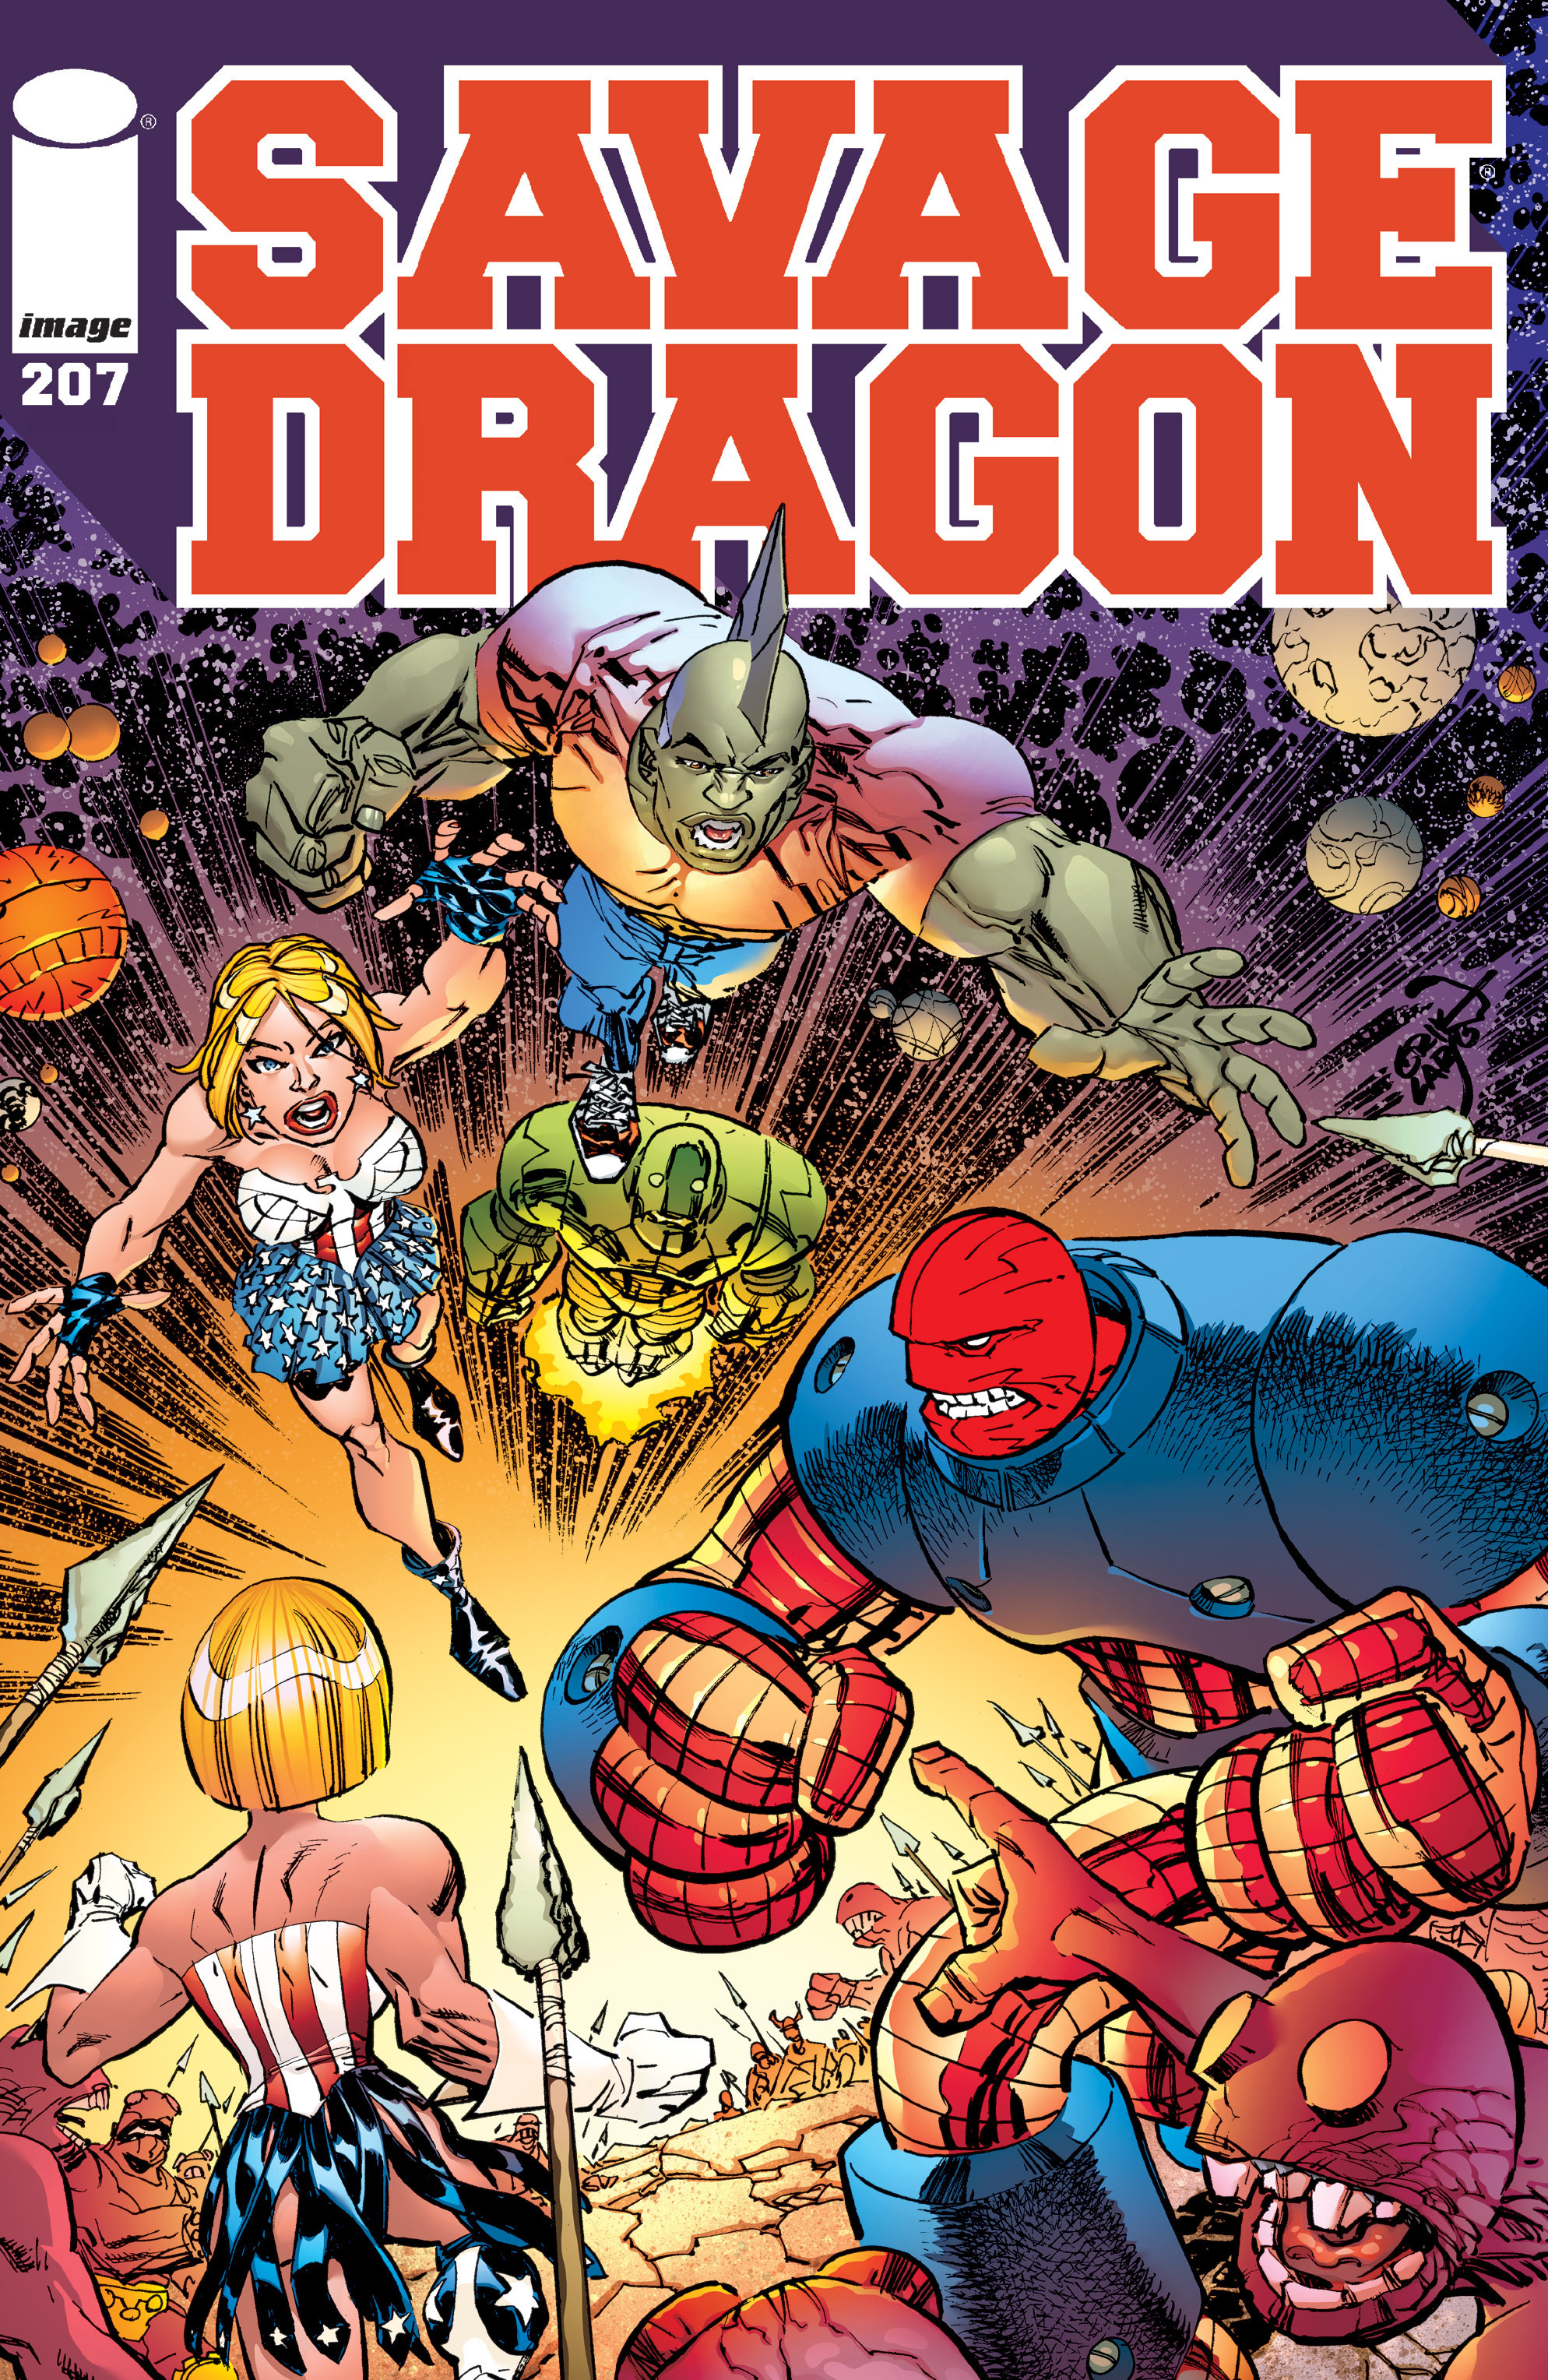 The Savage Dragon (1993) issue 207 - Page 1